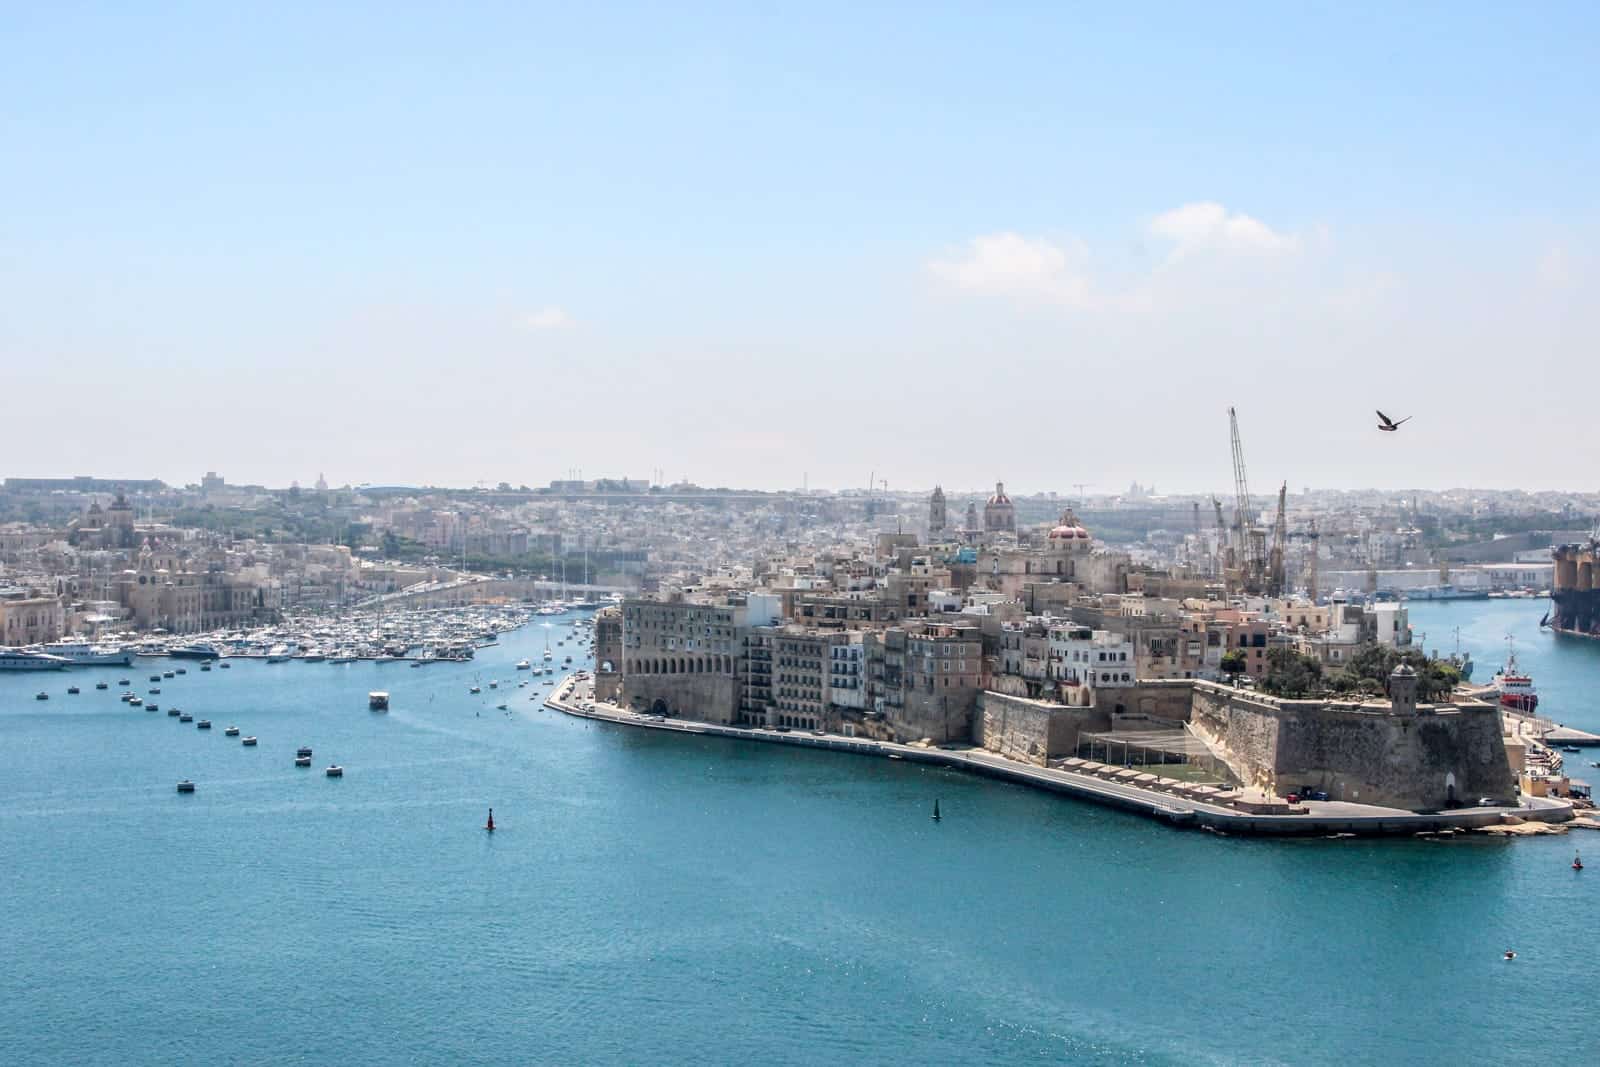 View of Malta island and the surrounding sea